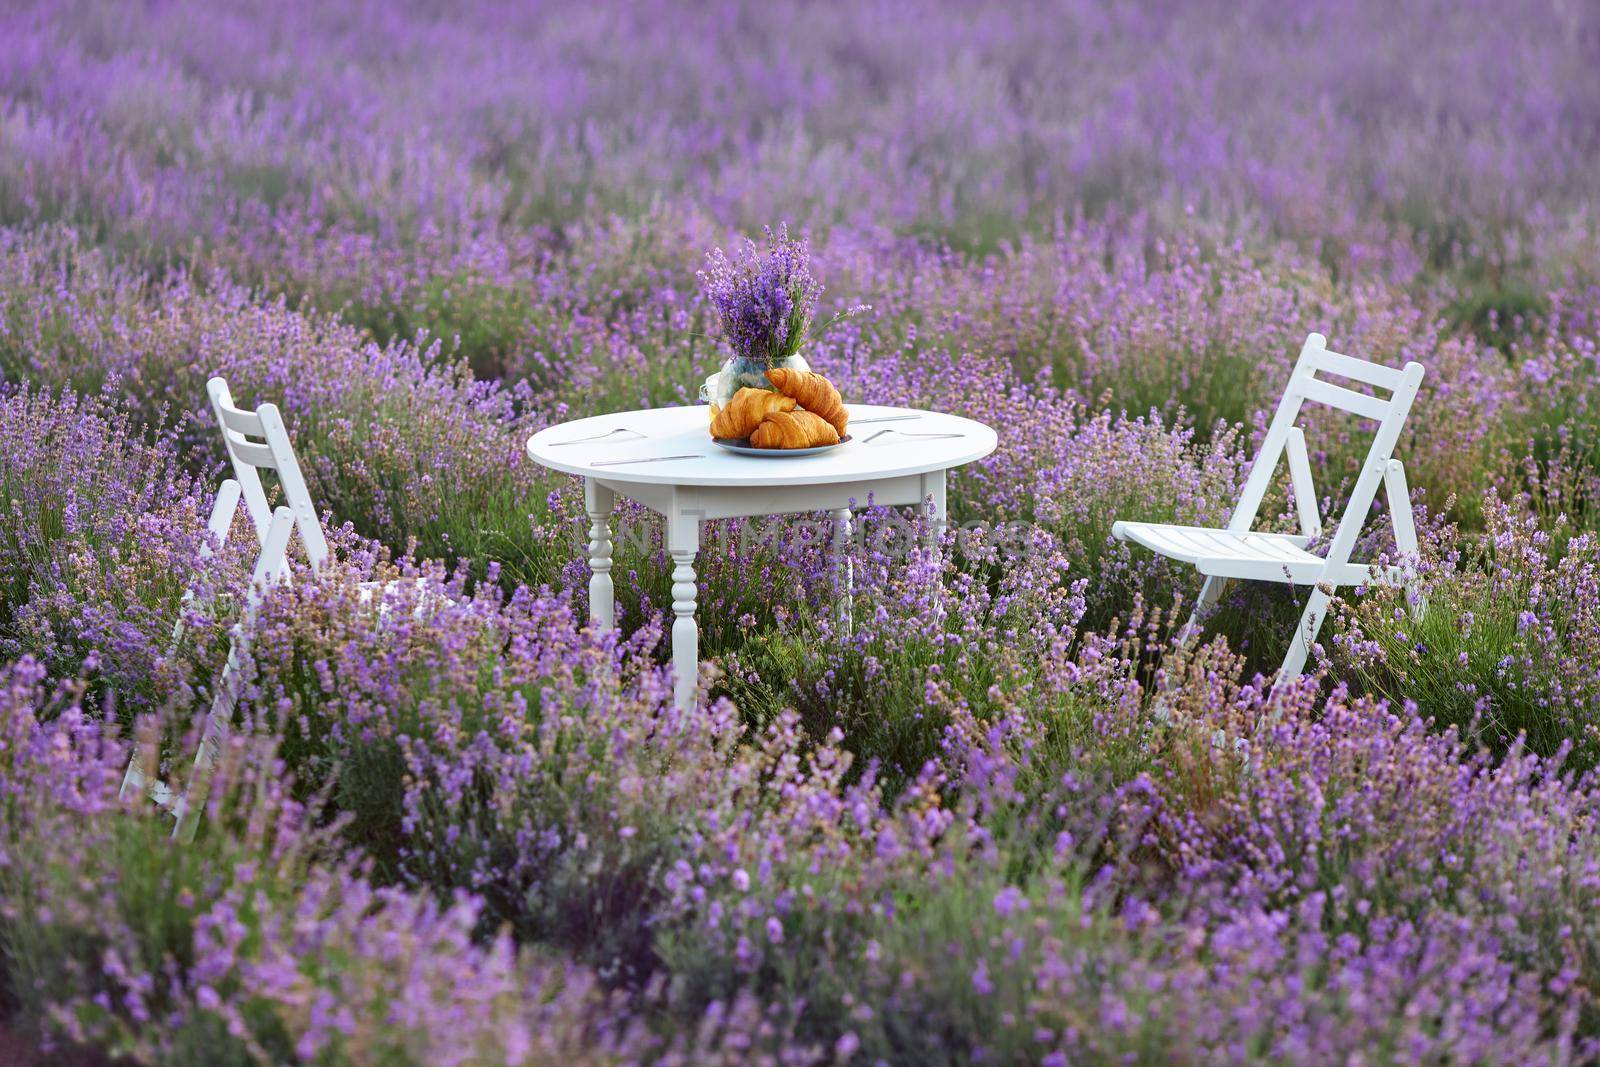 Table with croissants and chairs in lavender field. by SerhiiBobyk